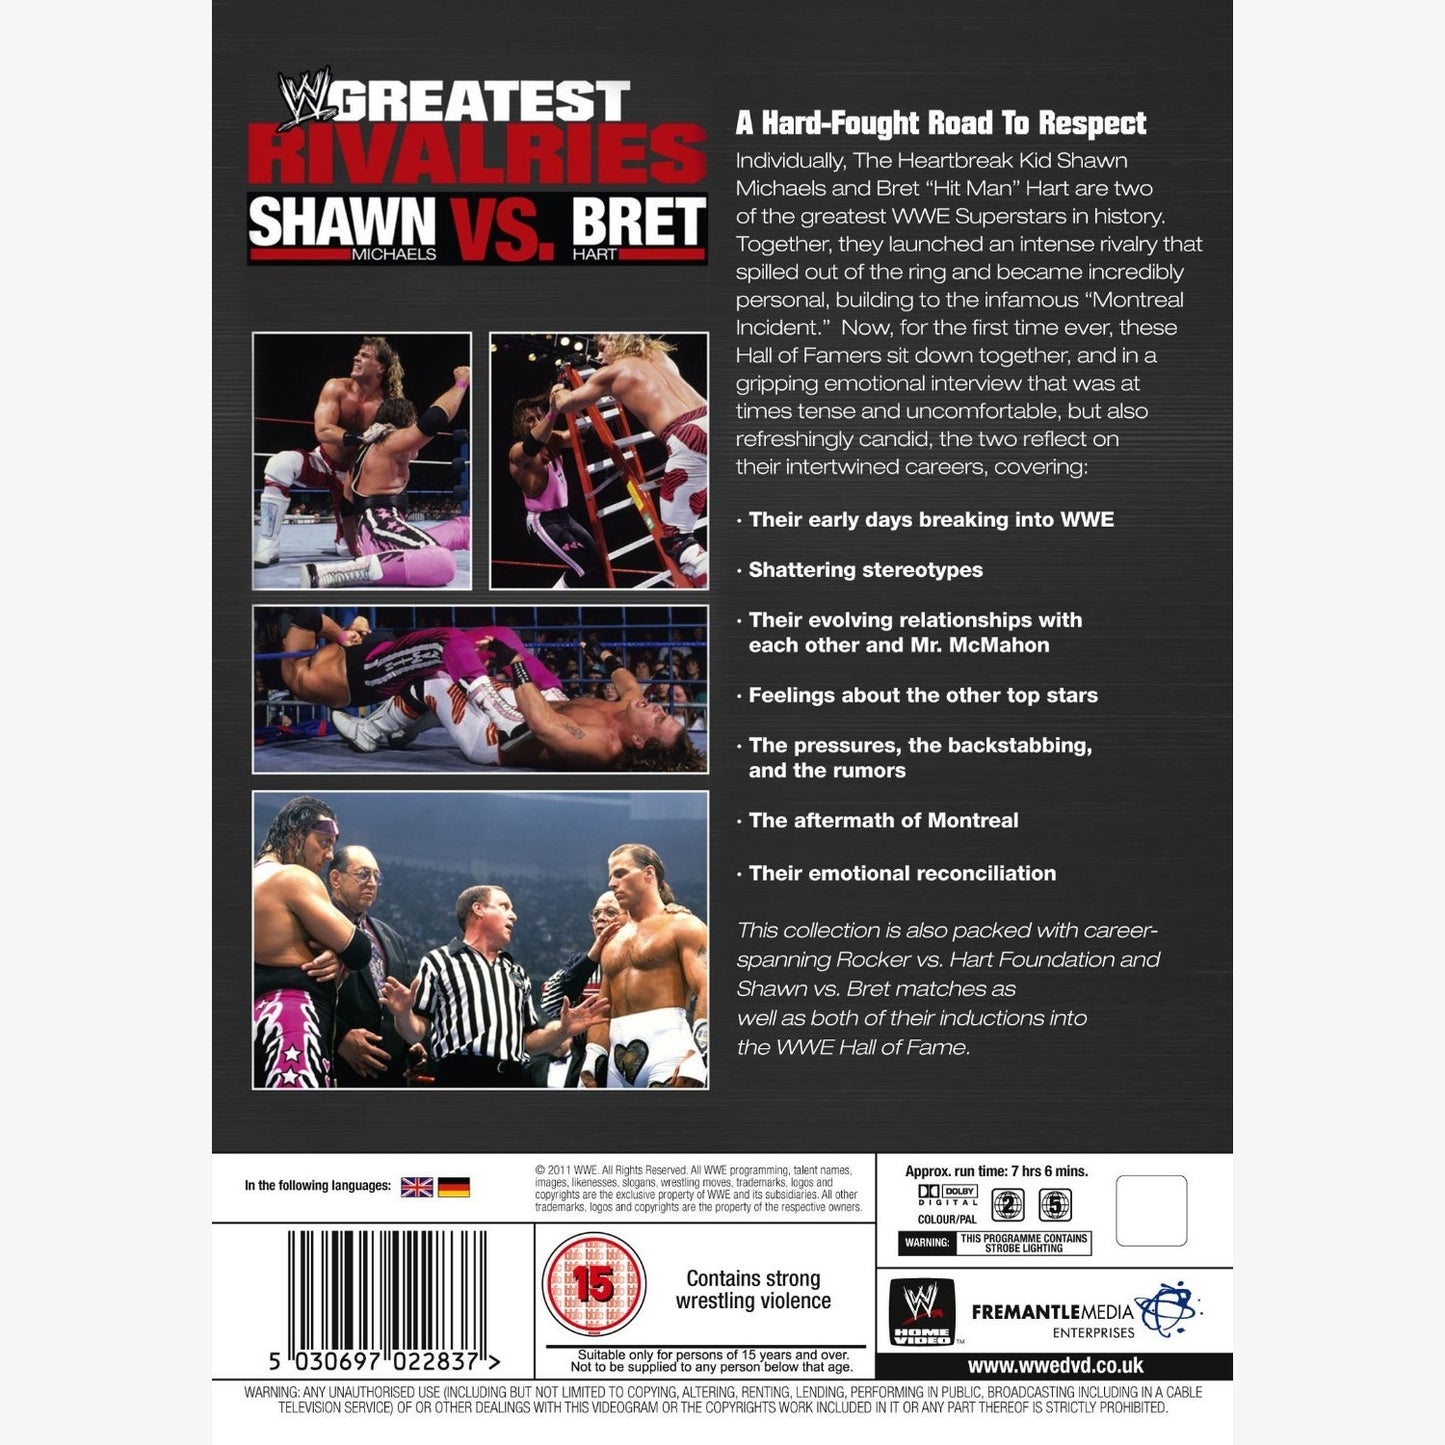 Shawn Michaels vs. Bret Hart - WWEs Greatest Rivalries DVD